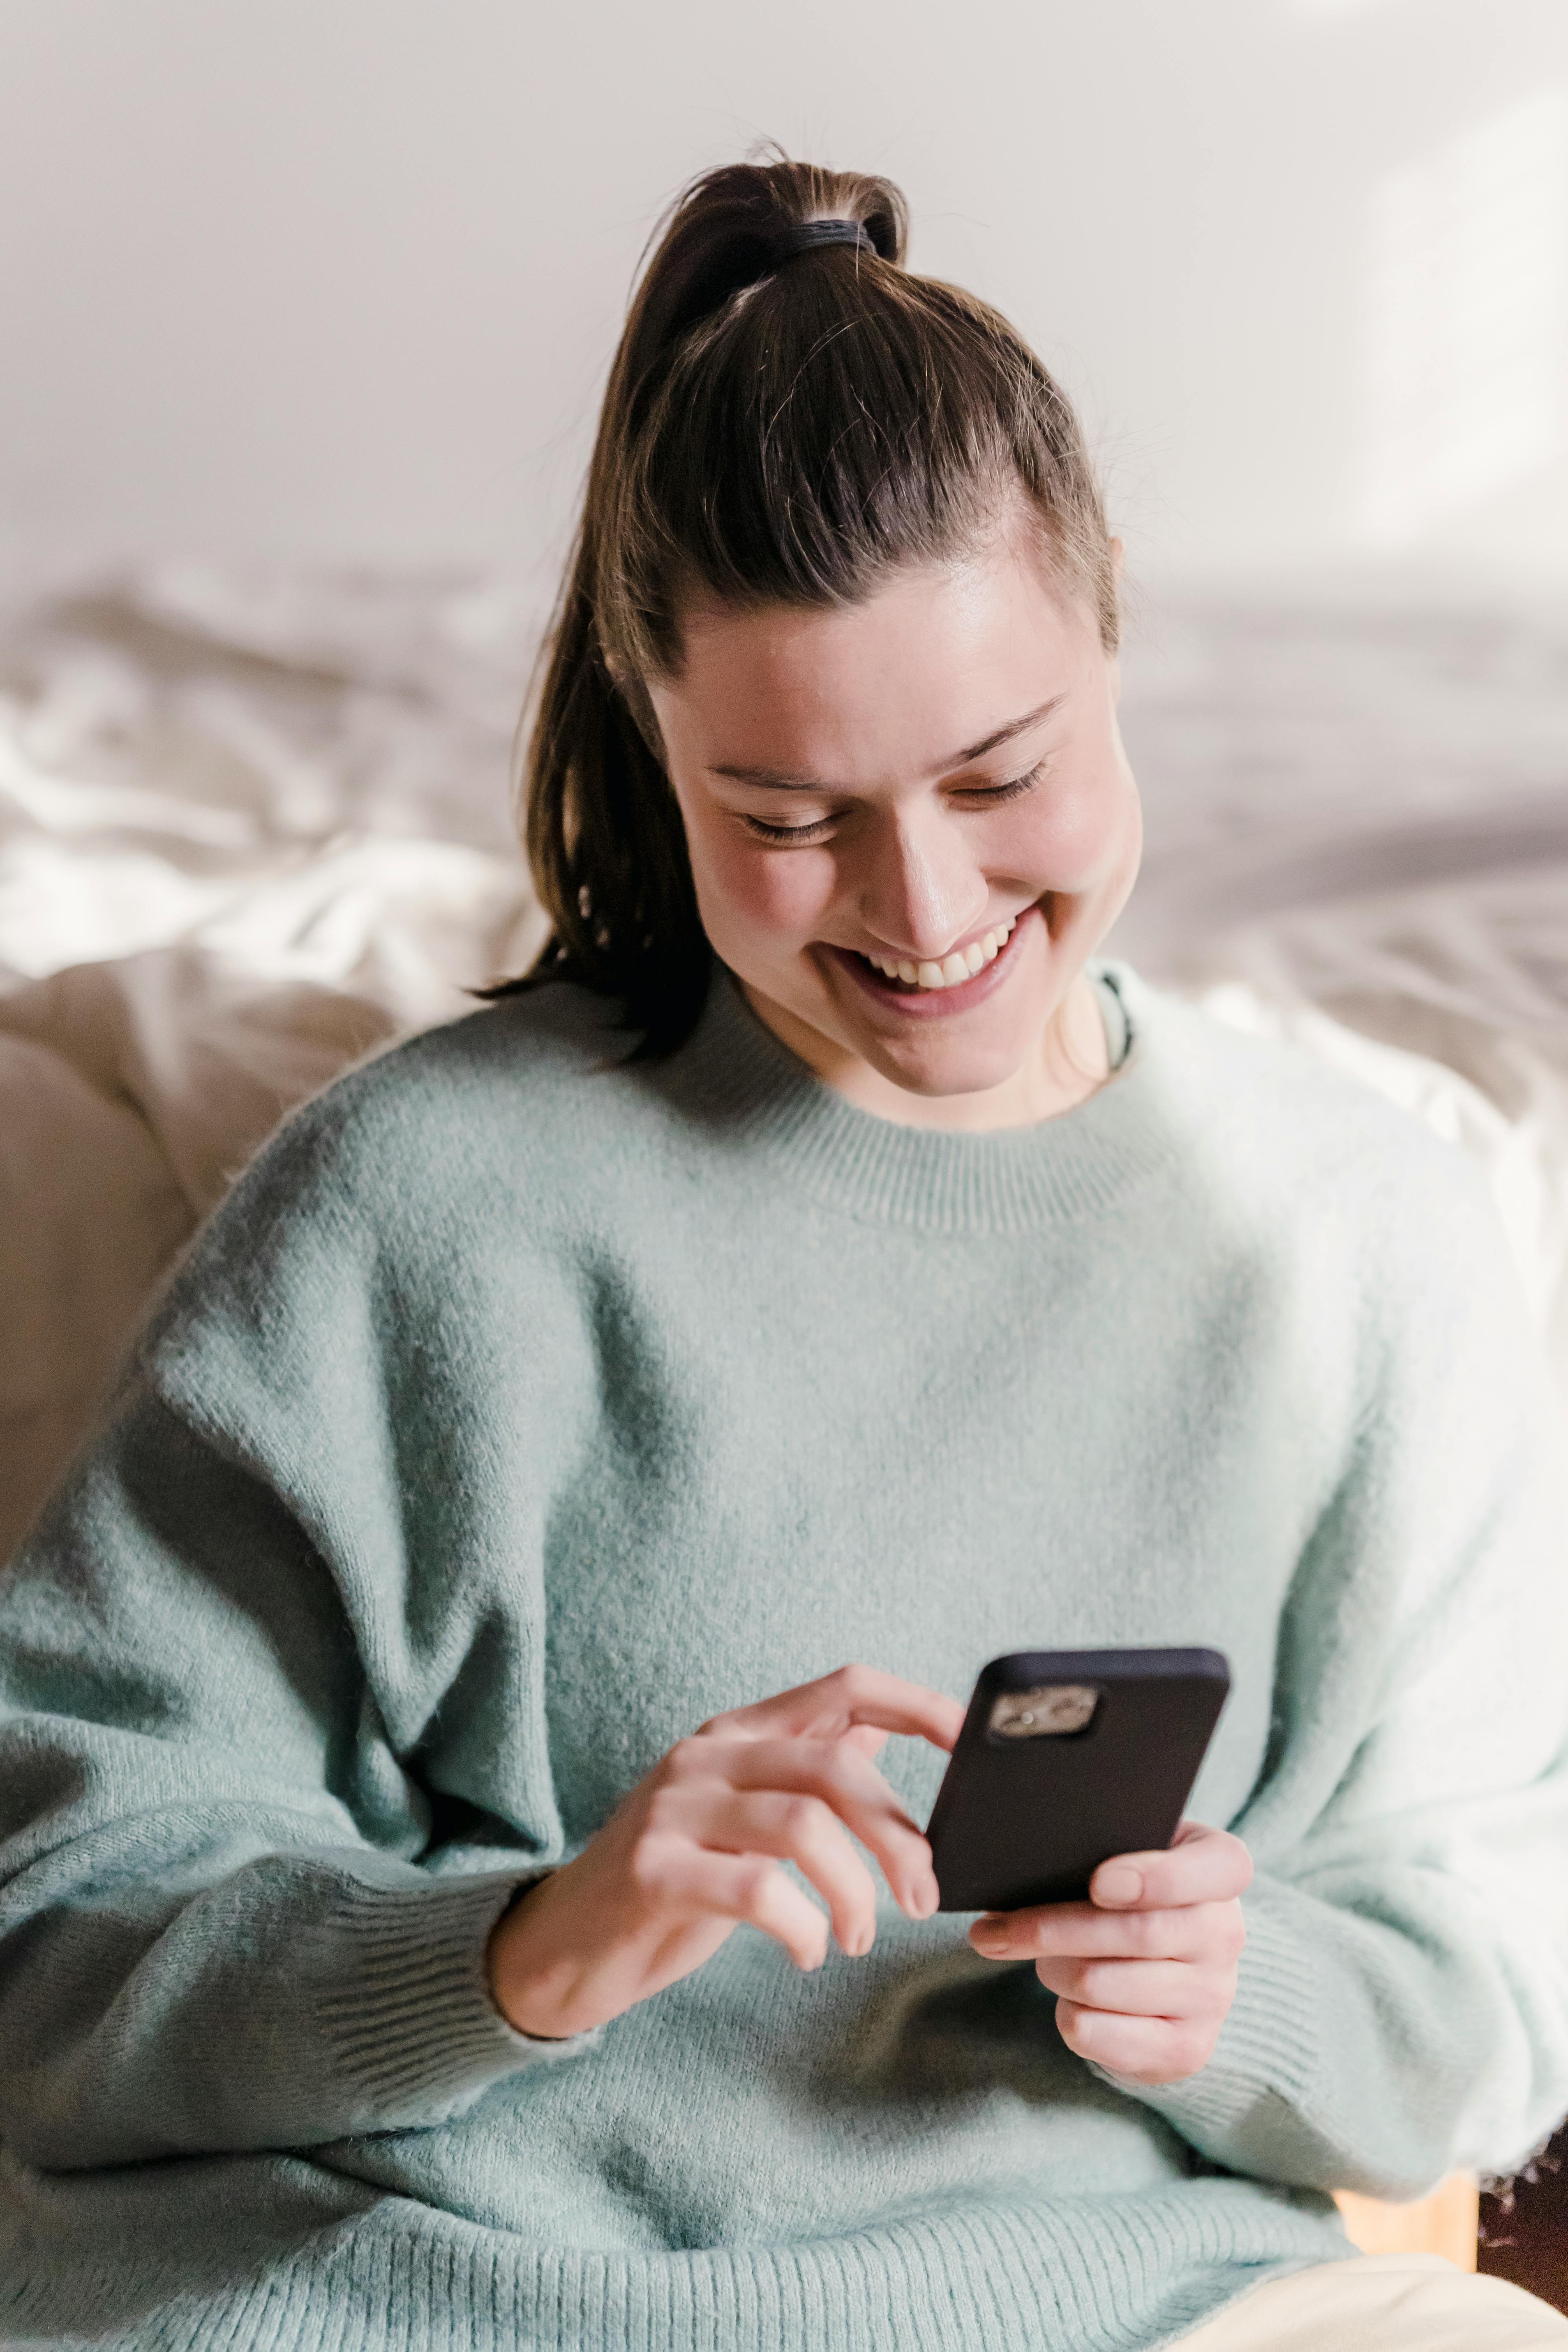 An extremely happy woman busy with her phone | Source: Pexels